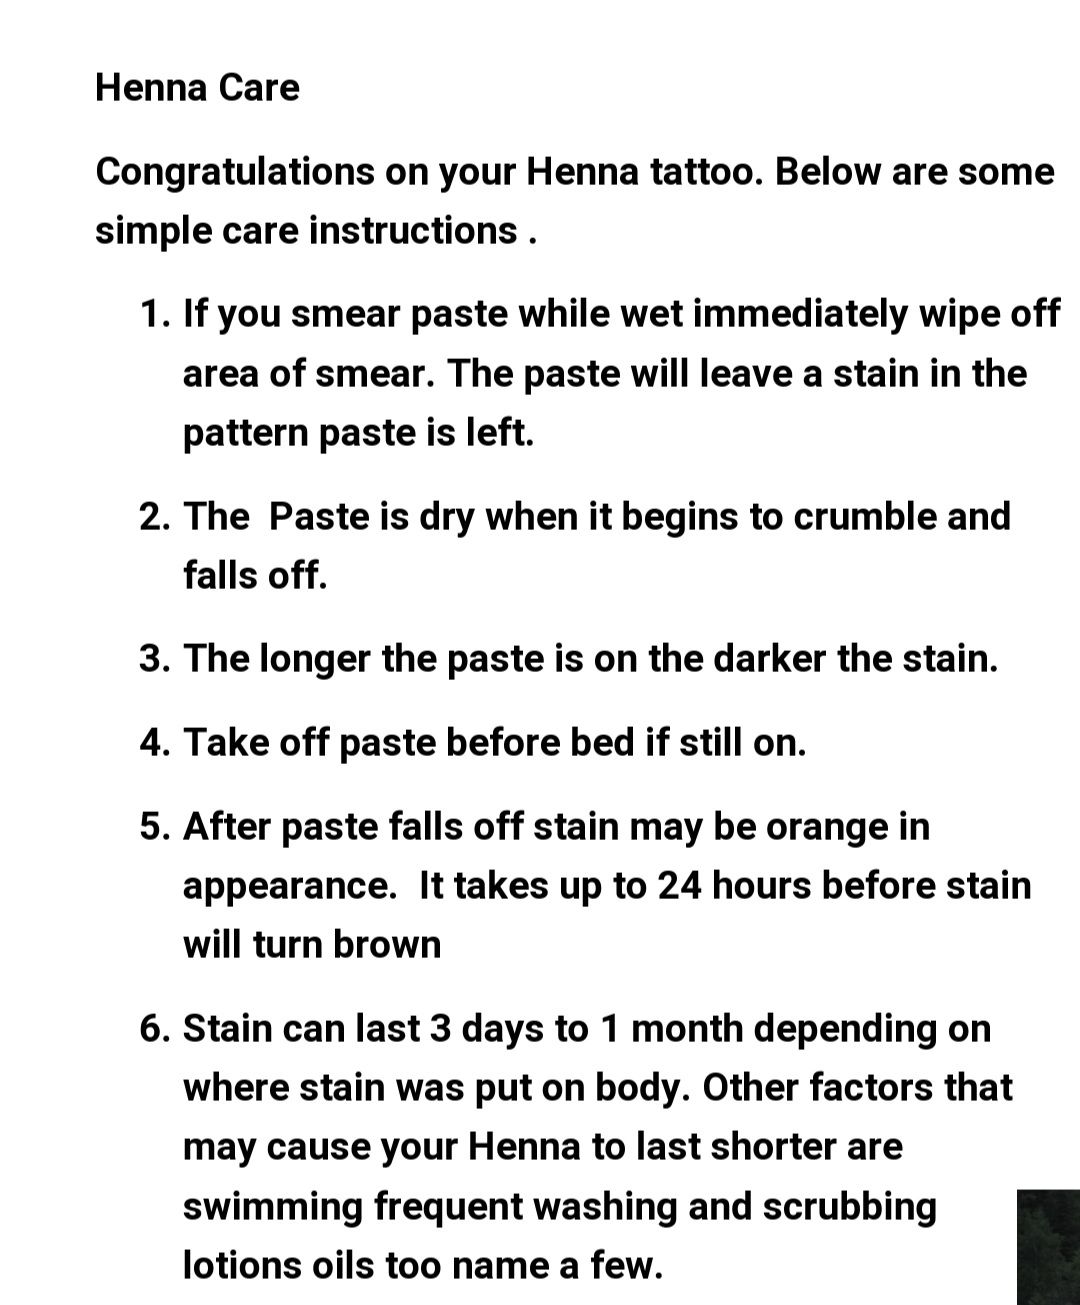 HENNA CARE AND INSTRUCTIONS 